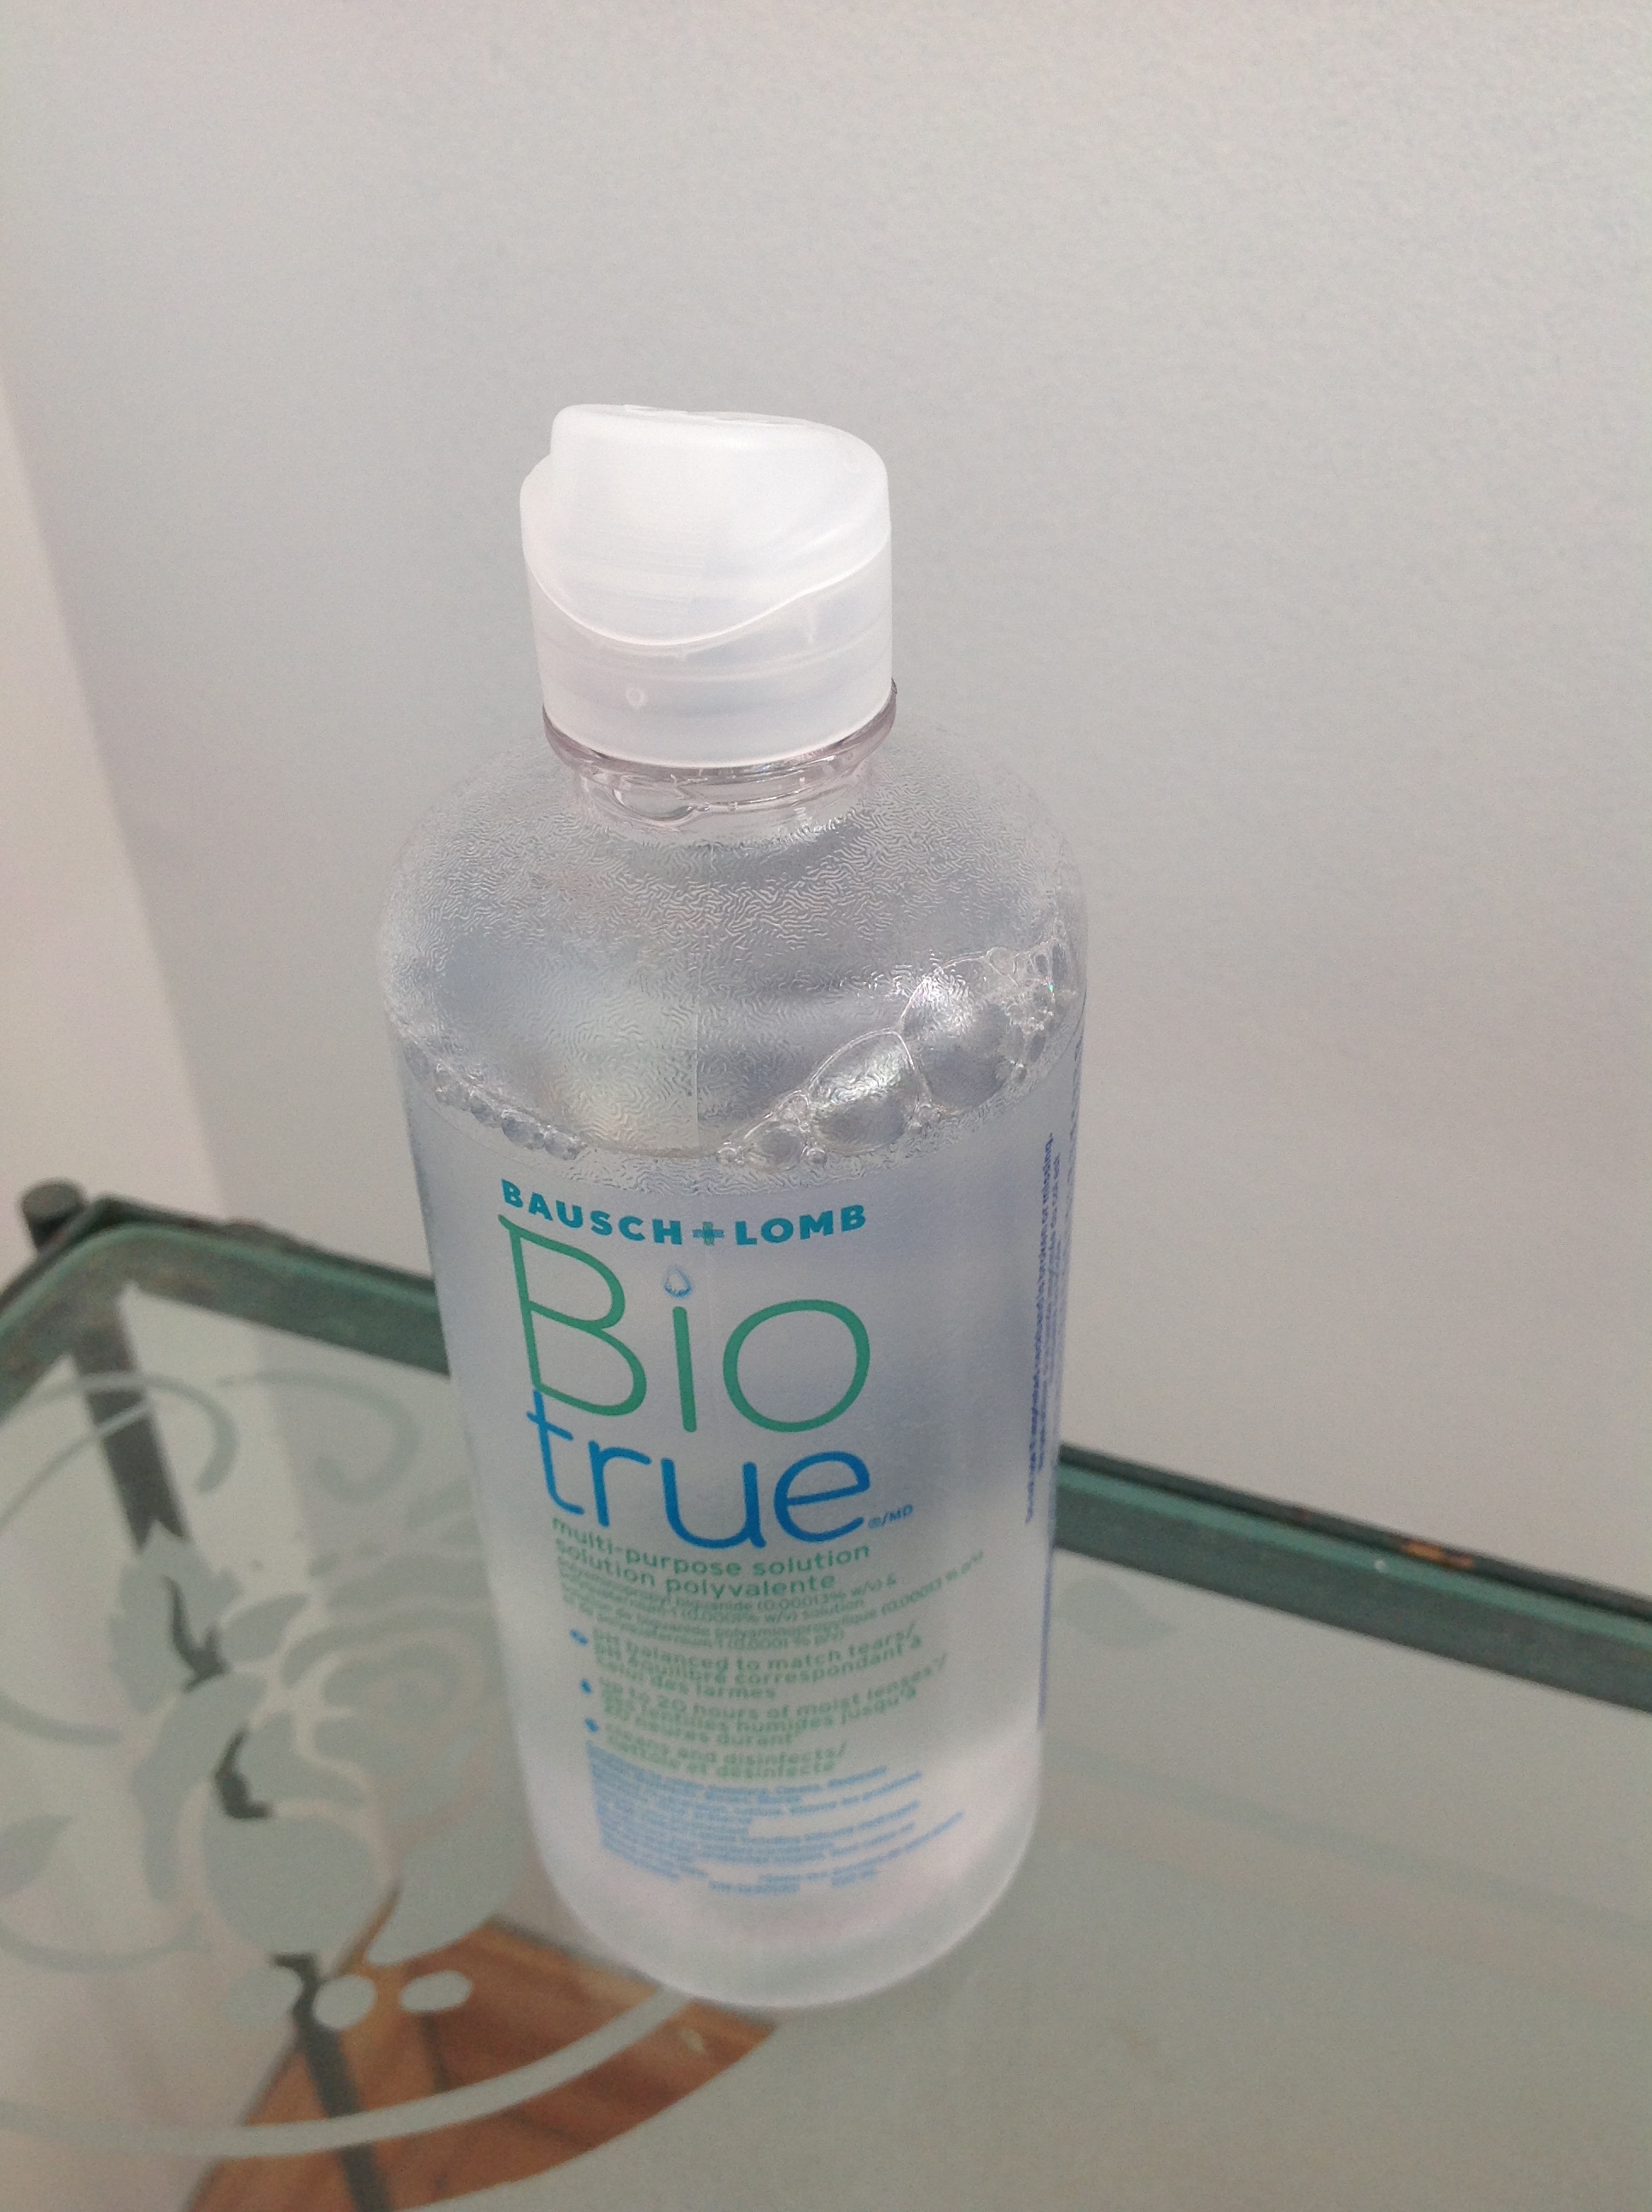 Bausch Lomb BioTrue Contact Lens Solution reviews in Eye